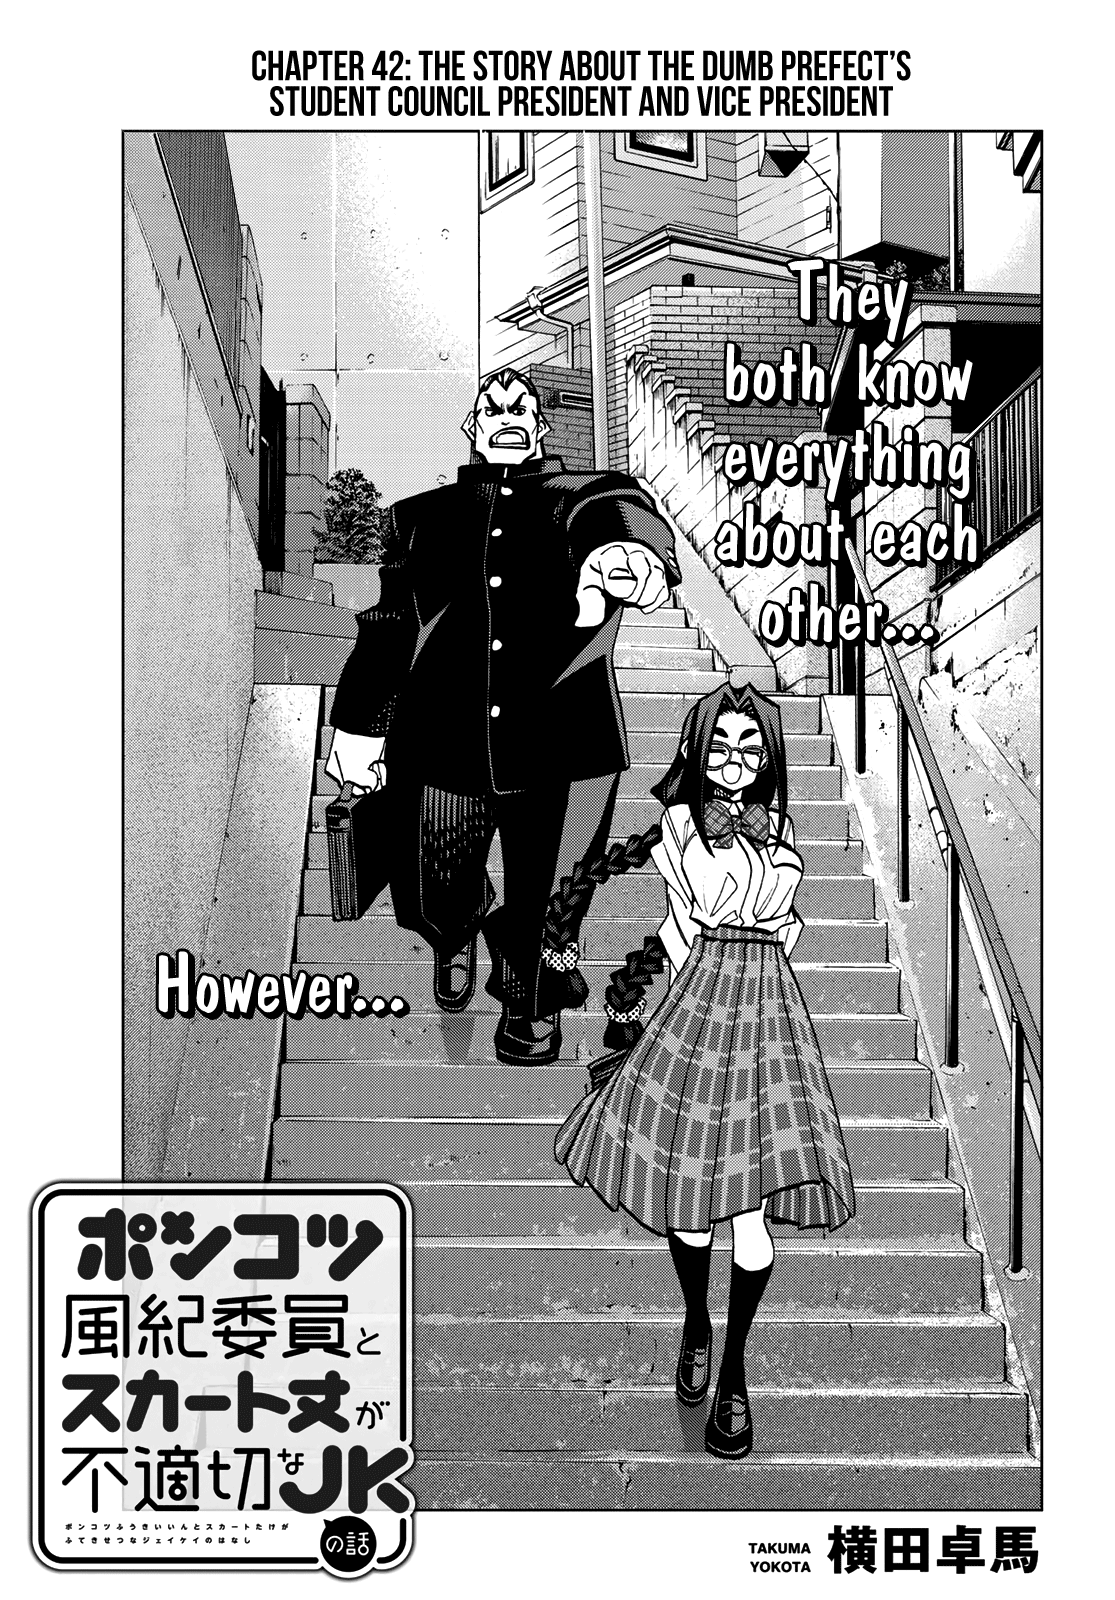 The Story Between A Dumb Prefect And A High School Girl With An Inappropriate Skirt Length - Page 1